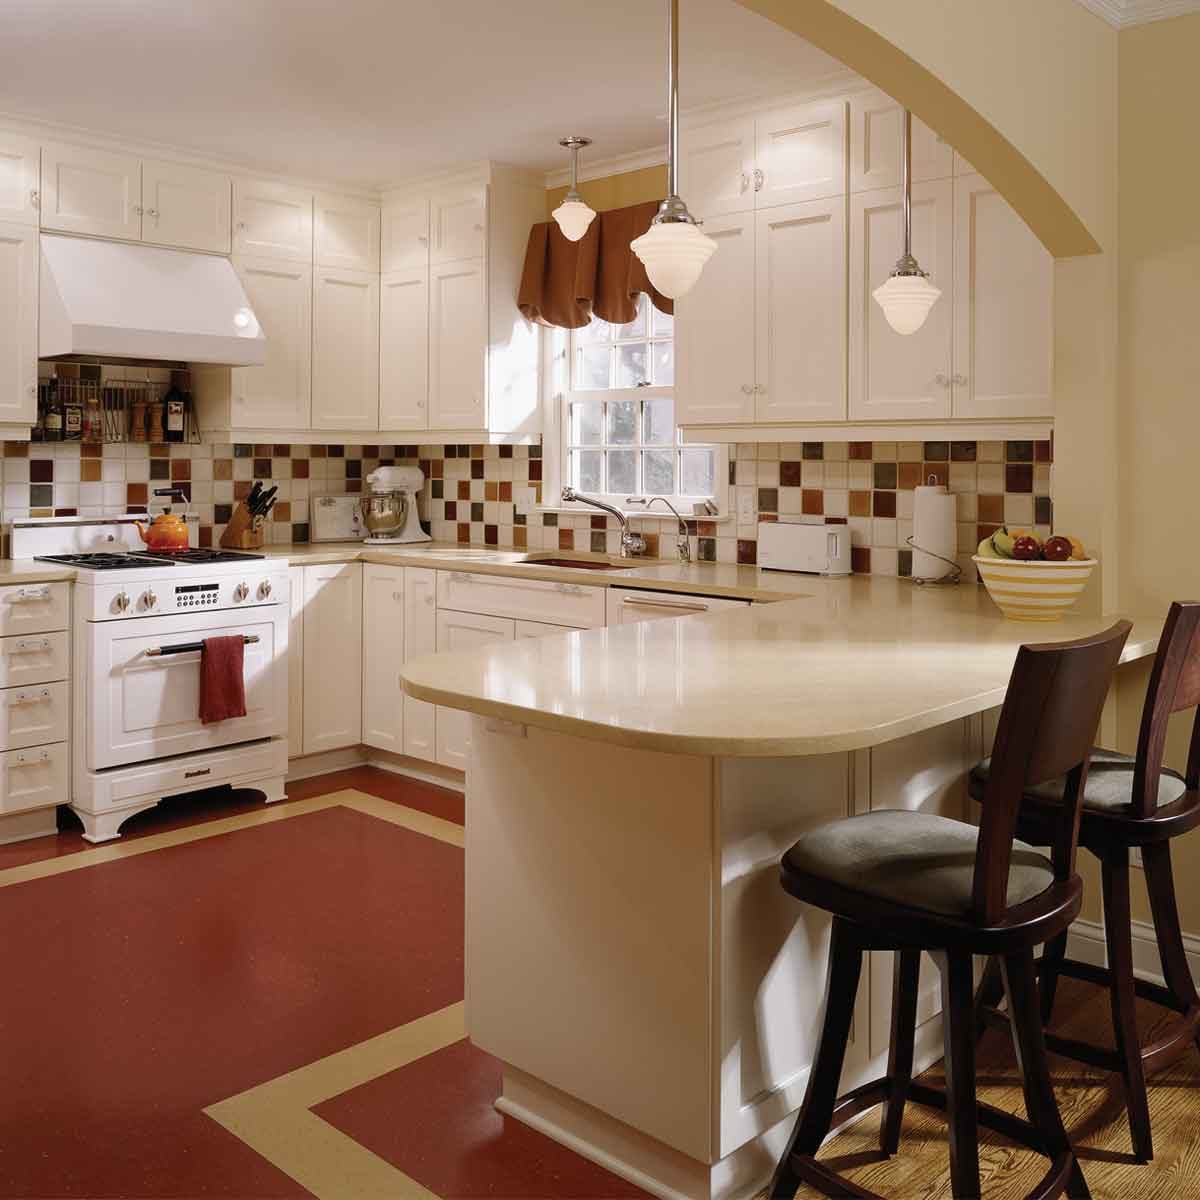 10 Small Kitchen Ideas to Maximize Space! The Family